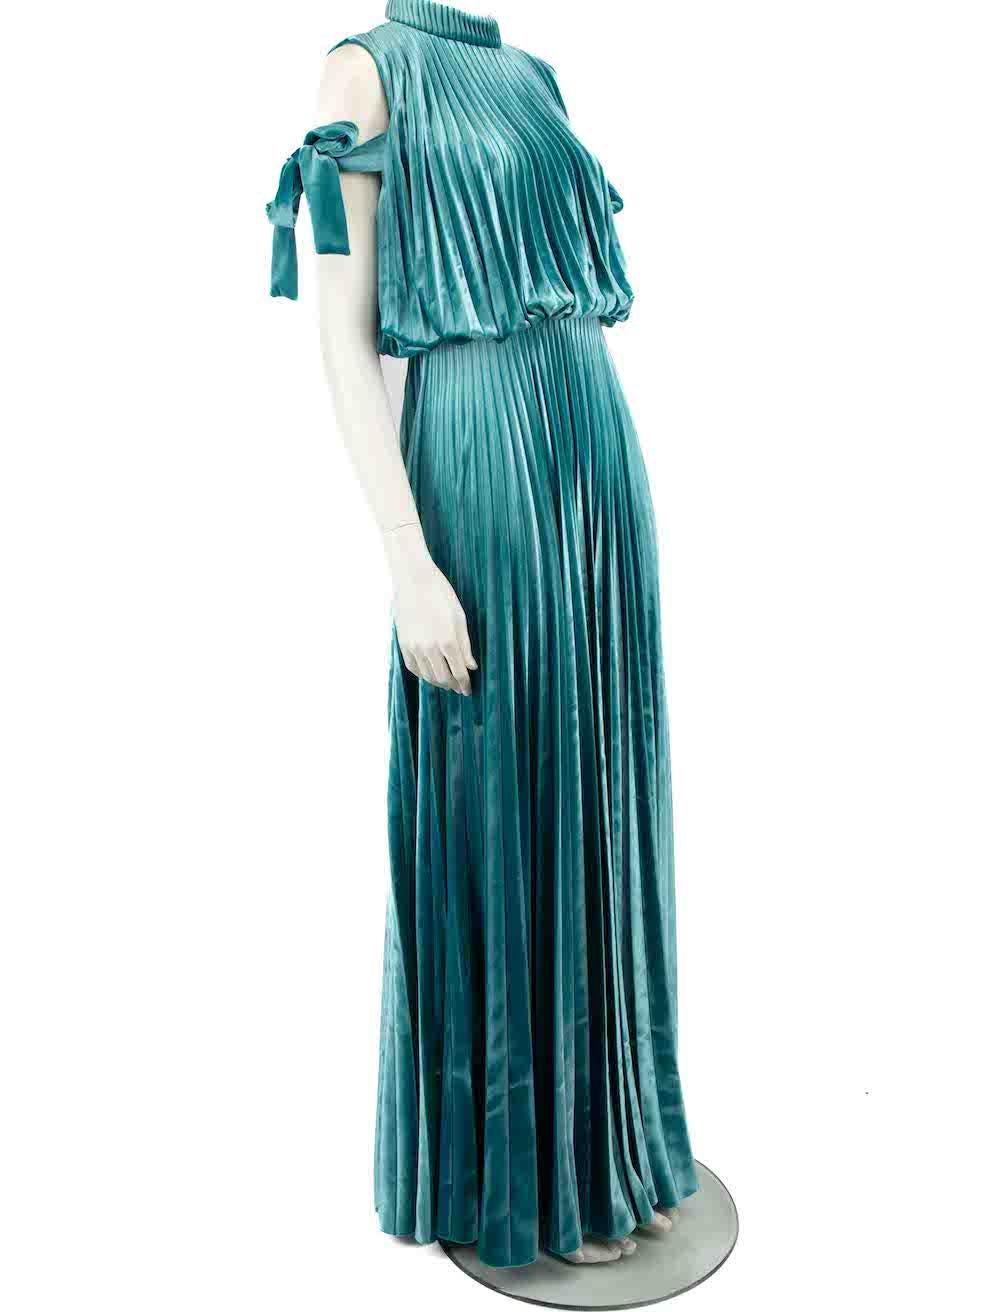 CONDITION is Very good. Minimal wear to dress is evident. Minimal wear to the neckline lining with discoloured marks on this used Mikael Aghal designer resale item.
 
 
 
 Details
 
 
 Teal
 
 Velvet
 
 Gown
 
 Pleated
 
 Mock neck
 
 Open back
 
